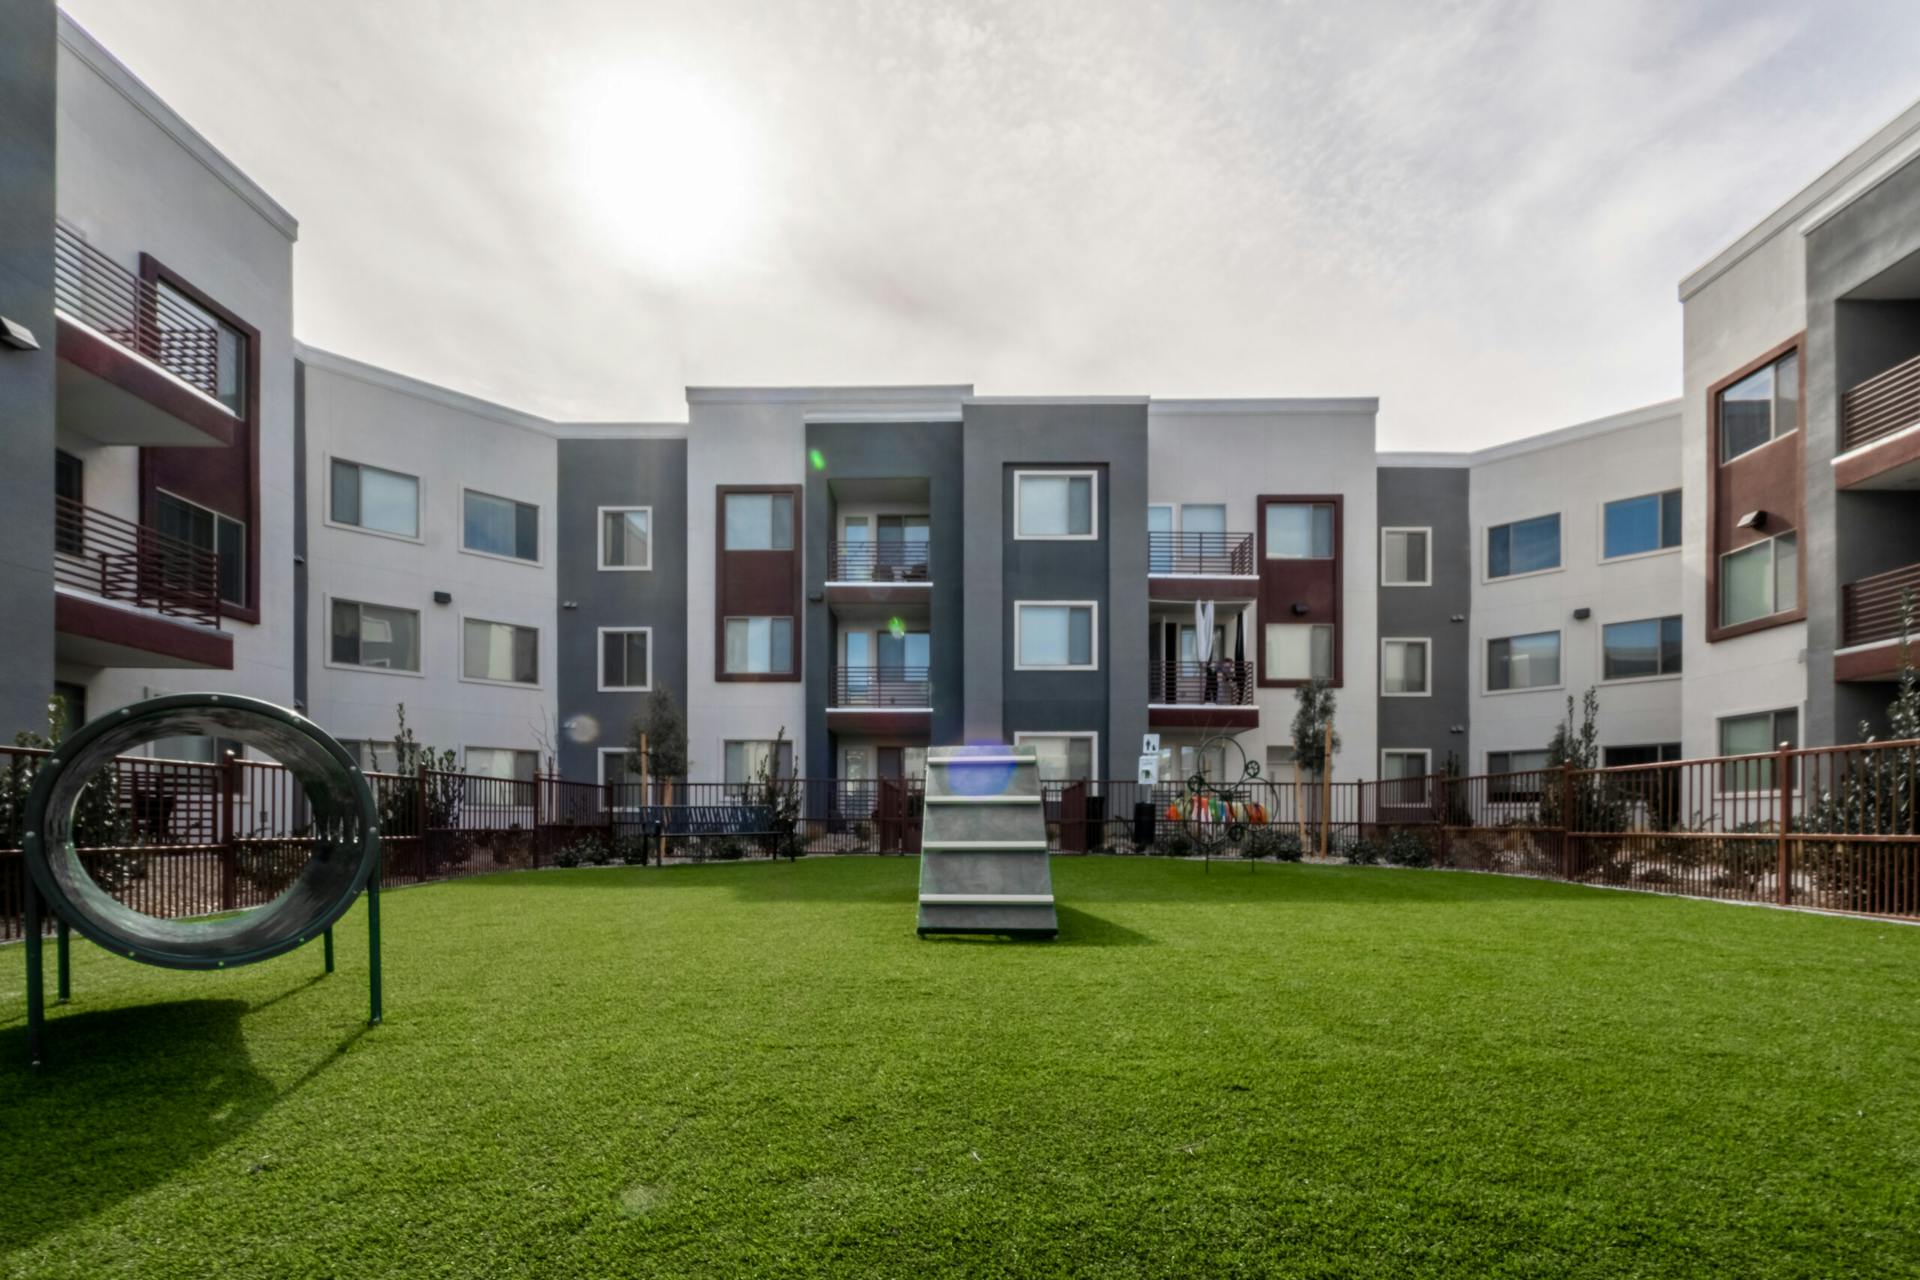 elysian living apartments with dog park